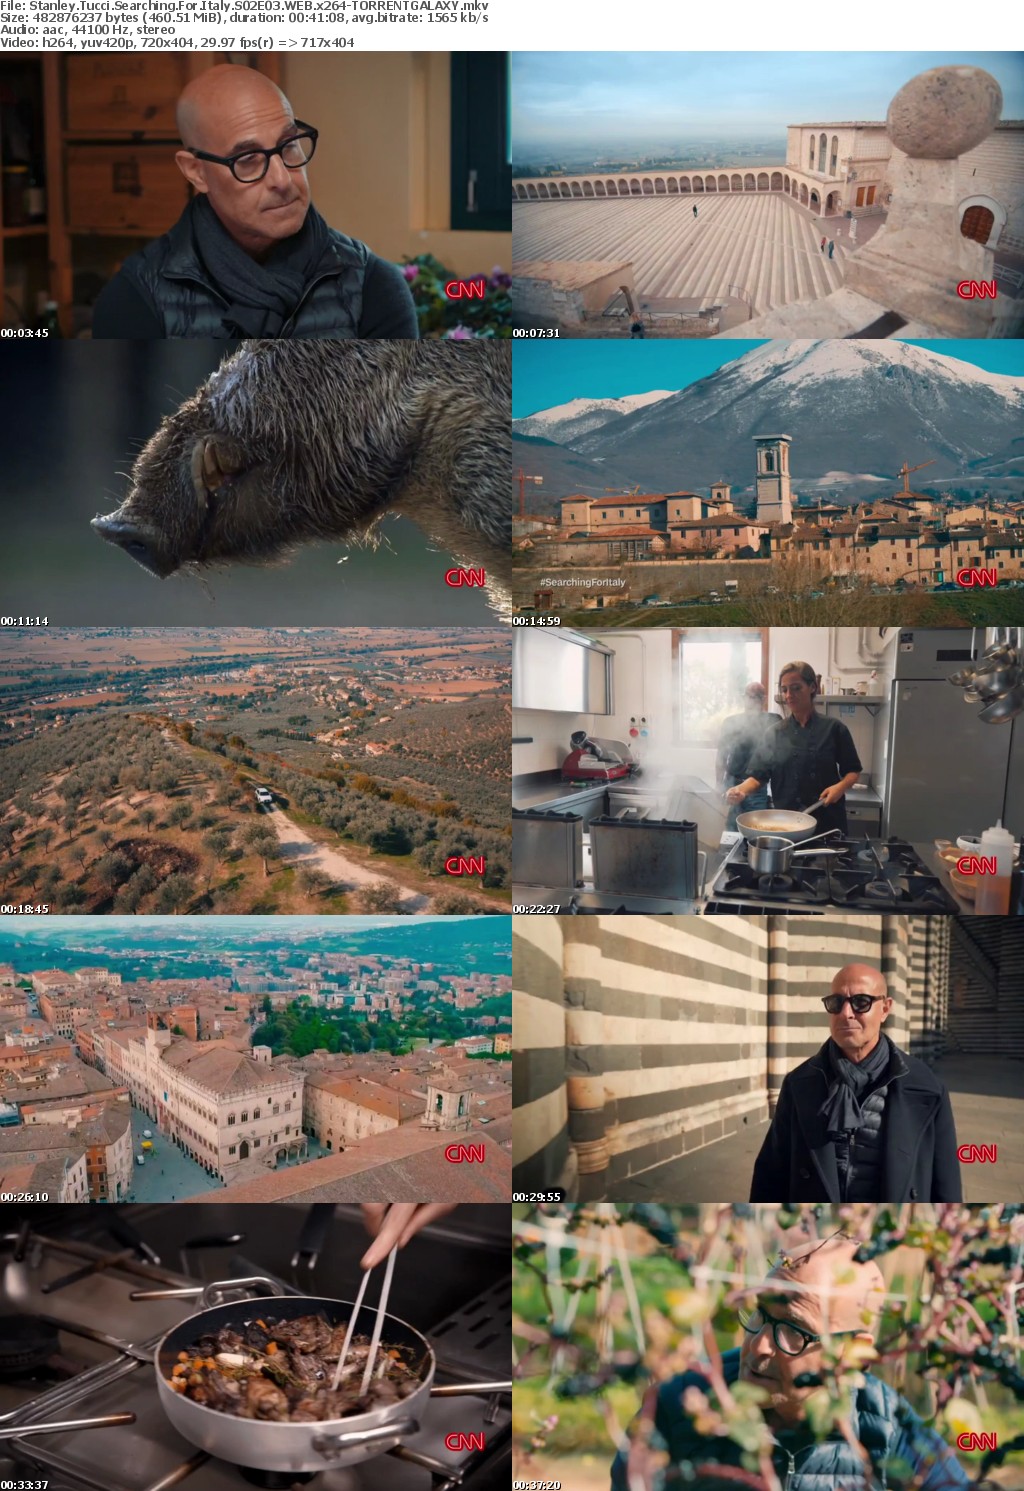 Stanley Tucci Searching For Italy S02E03 WEB x264-GALAXY